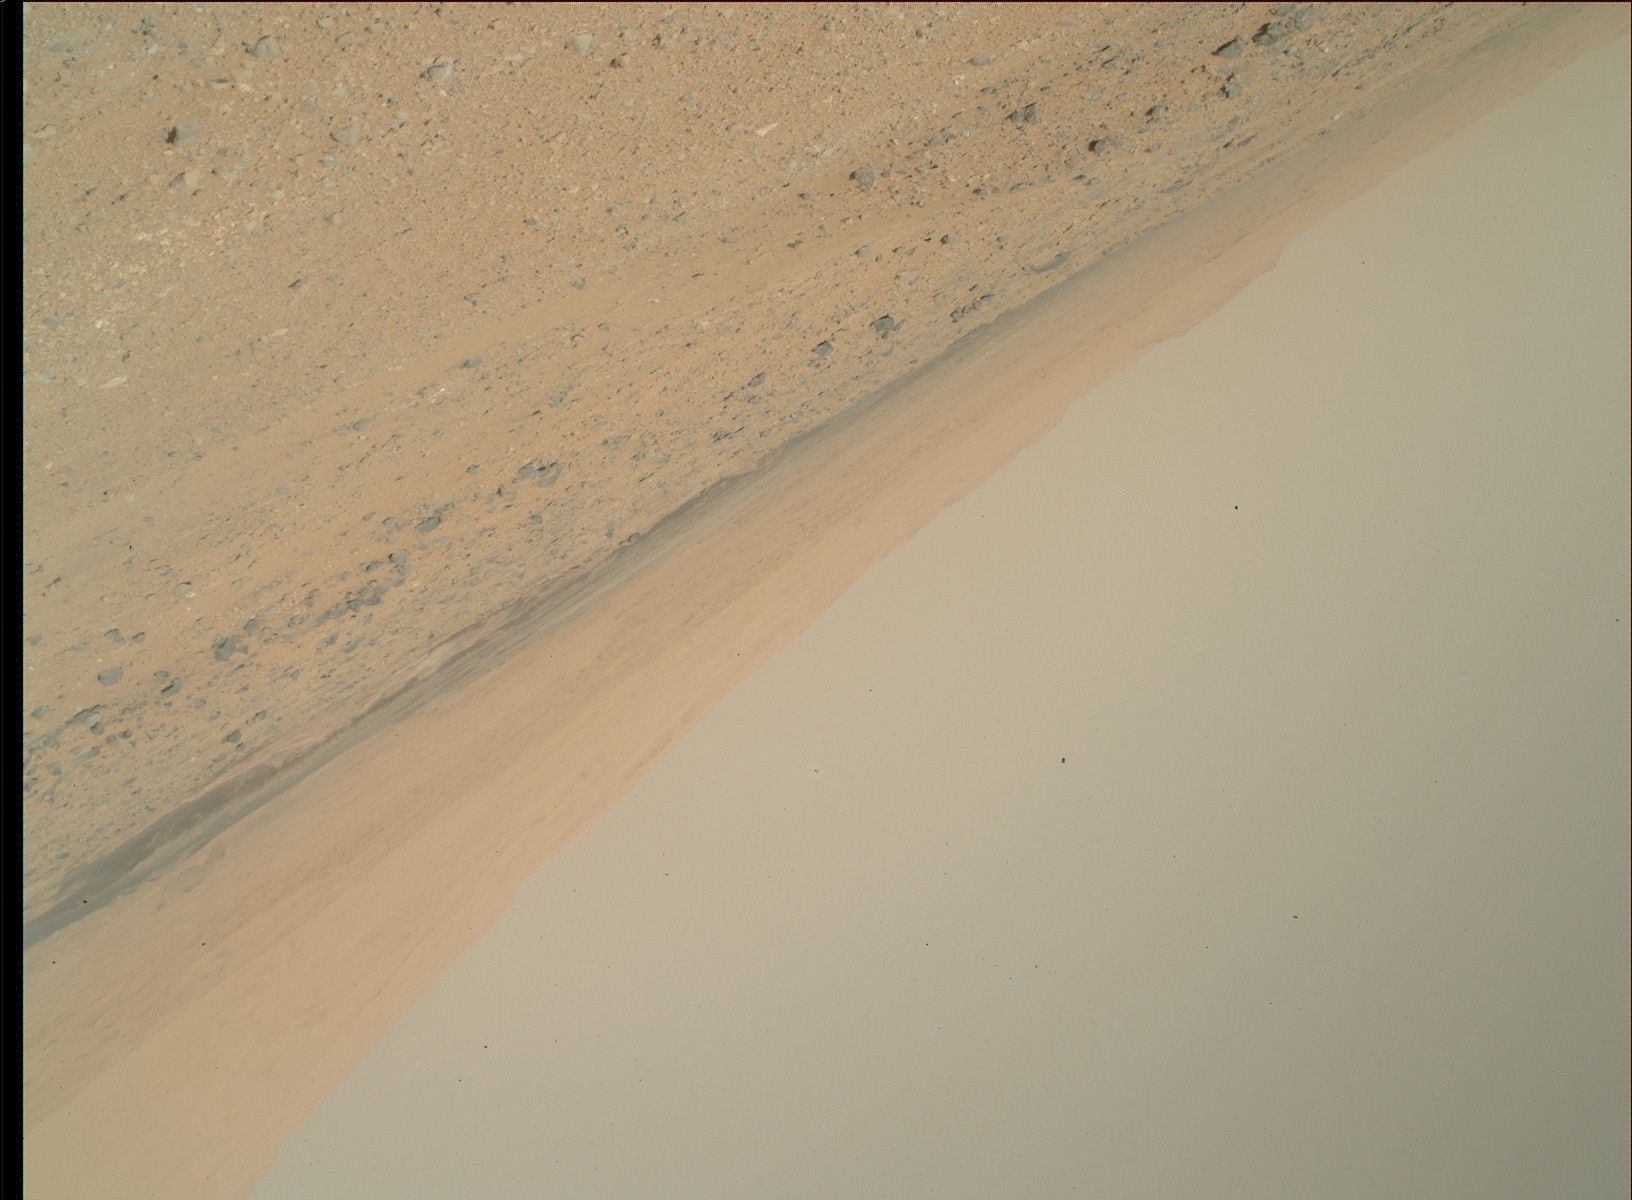 Nasa's Mars rover Curiosity acquired this image using its Mars Hand Lens Imager (MAHLI) on Sol 424